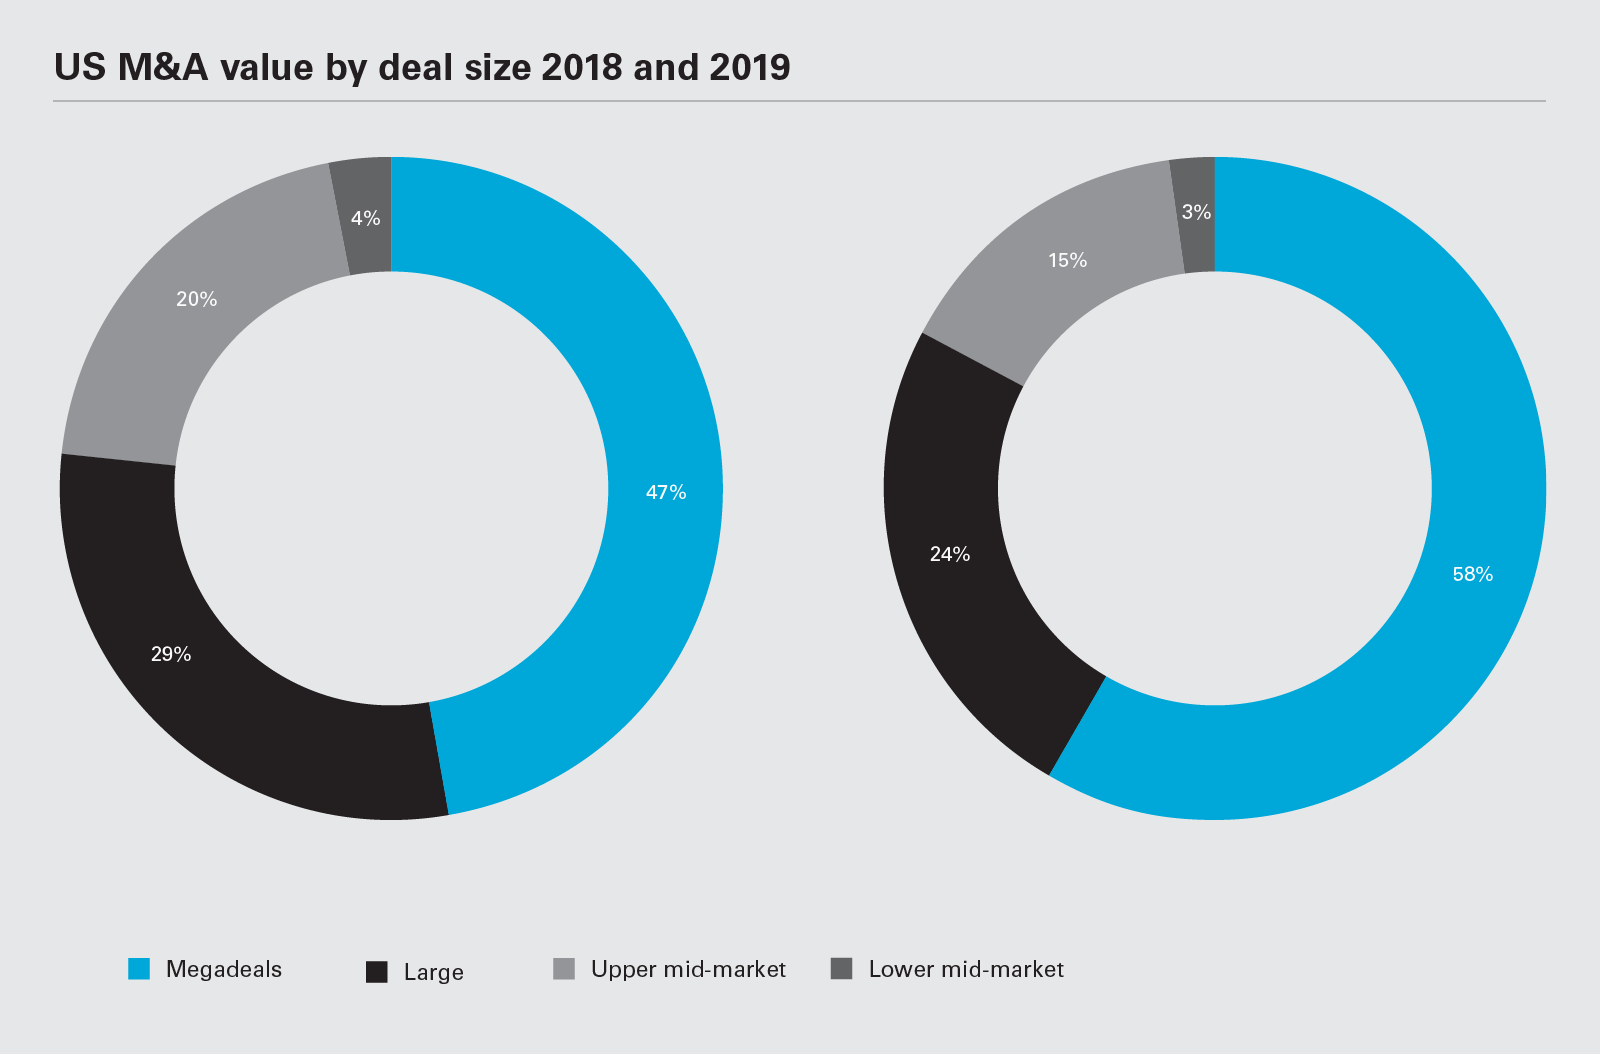 US M&A value by deal size 2018 and 2019